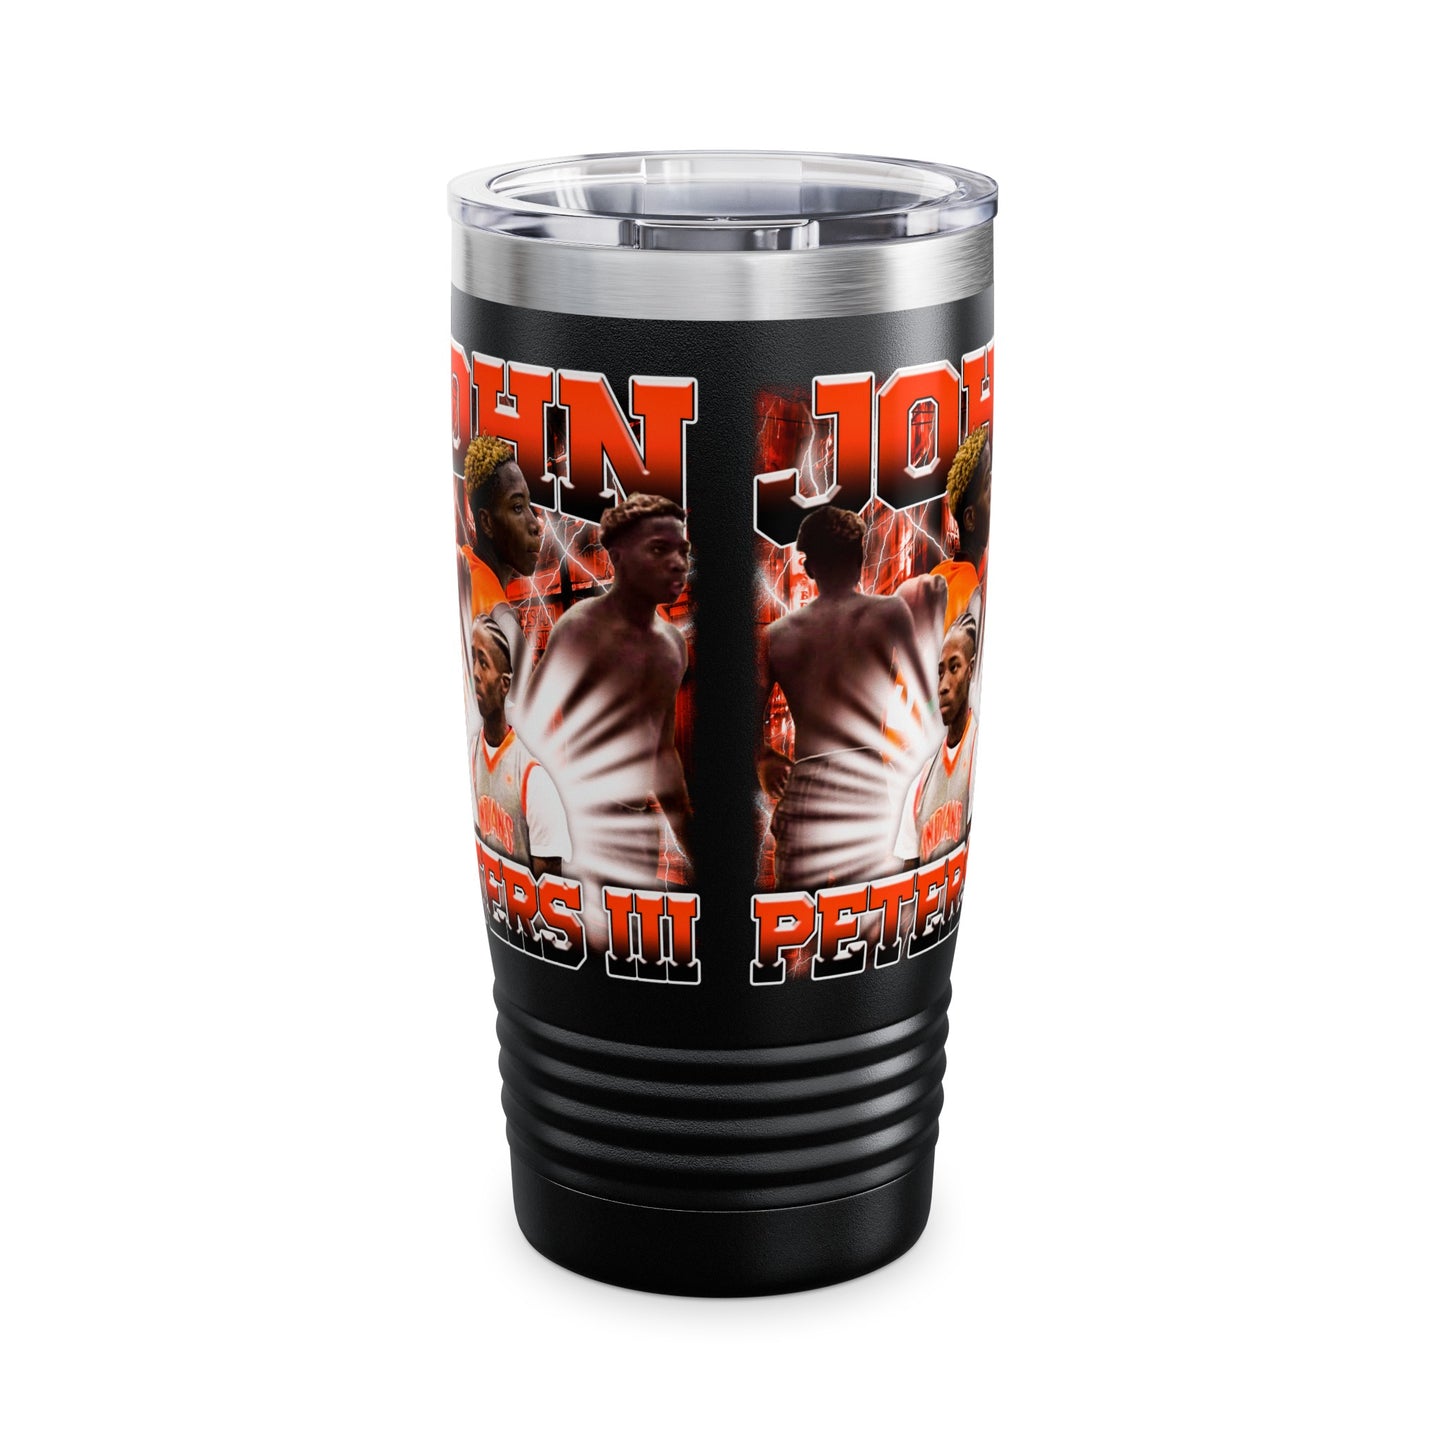 John Peters lll Stainless Steal Tumbler